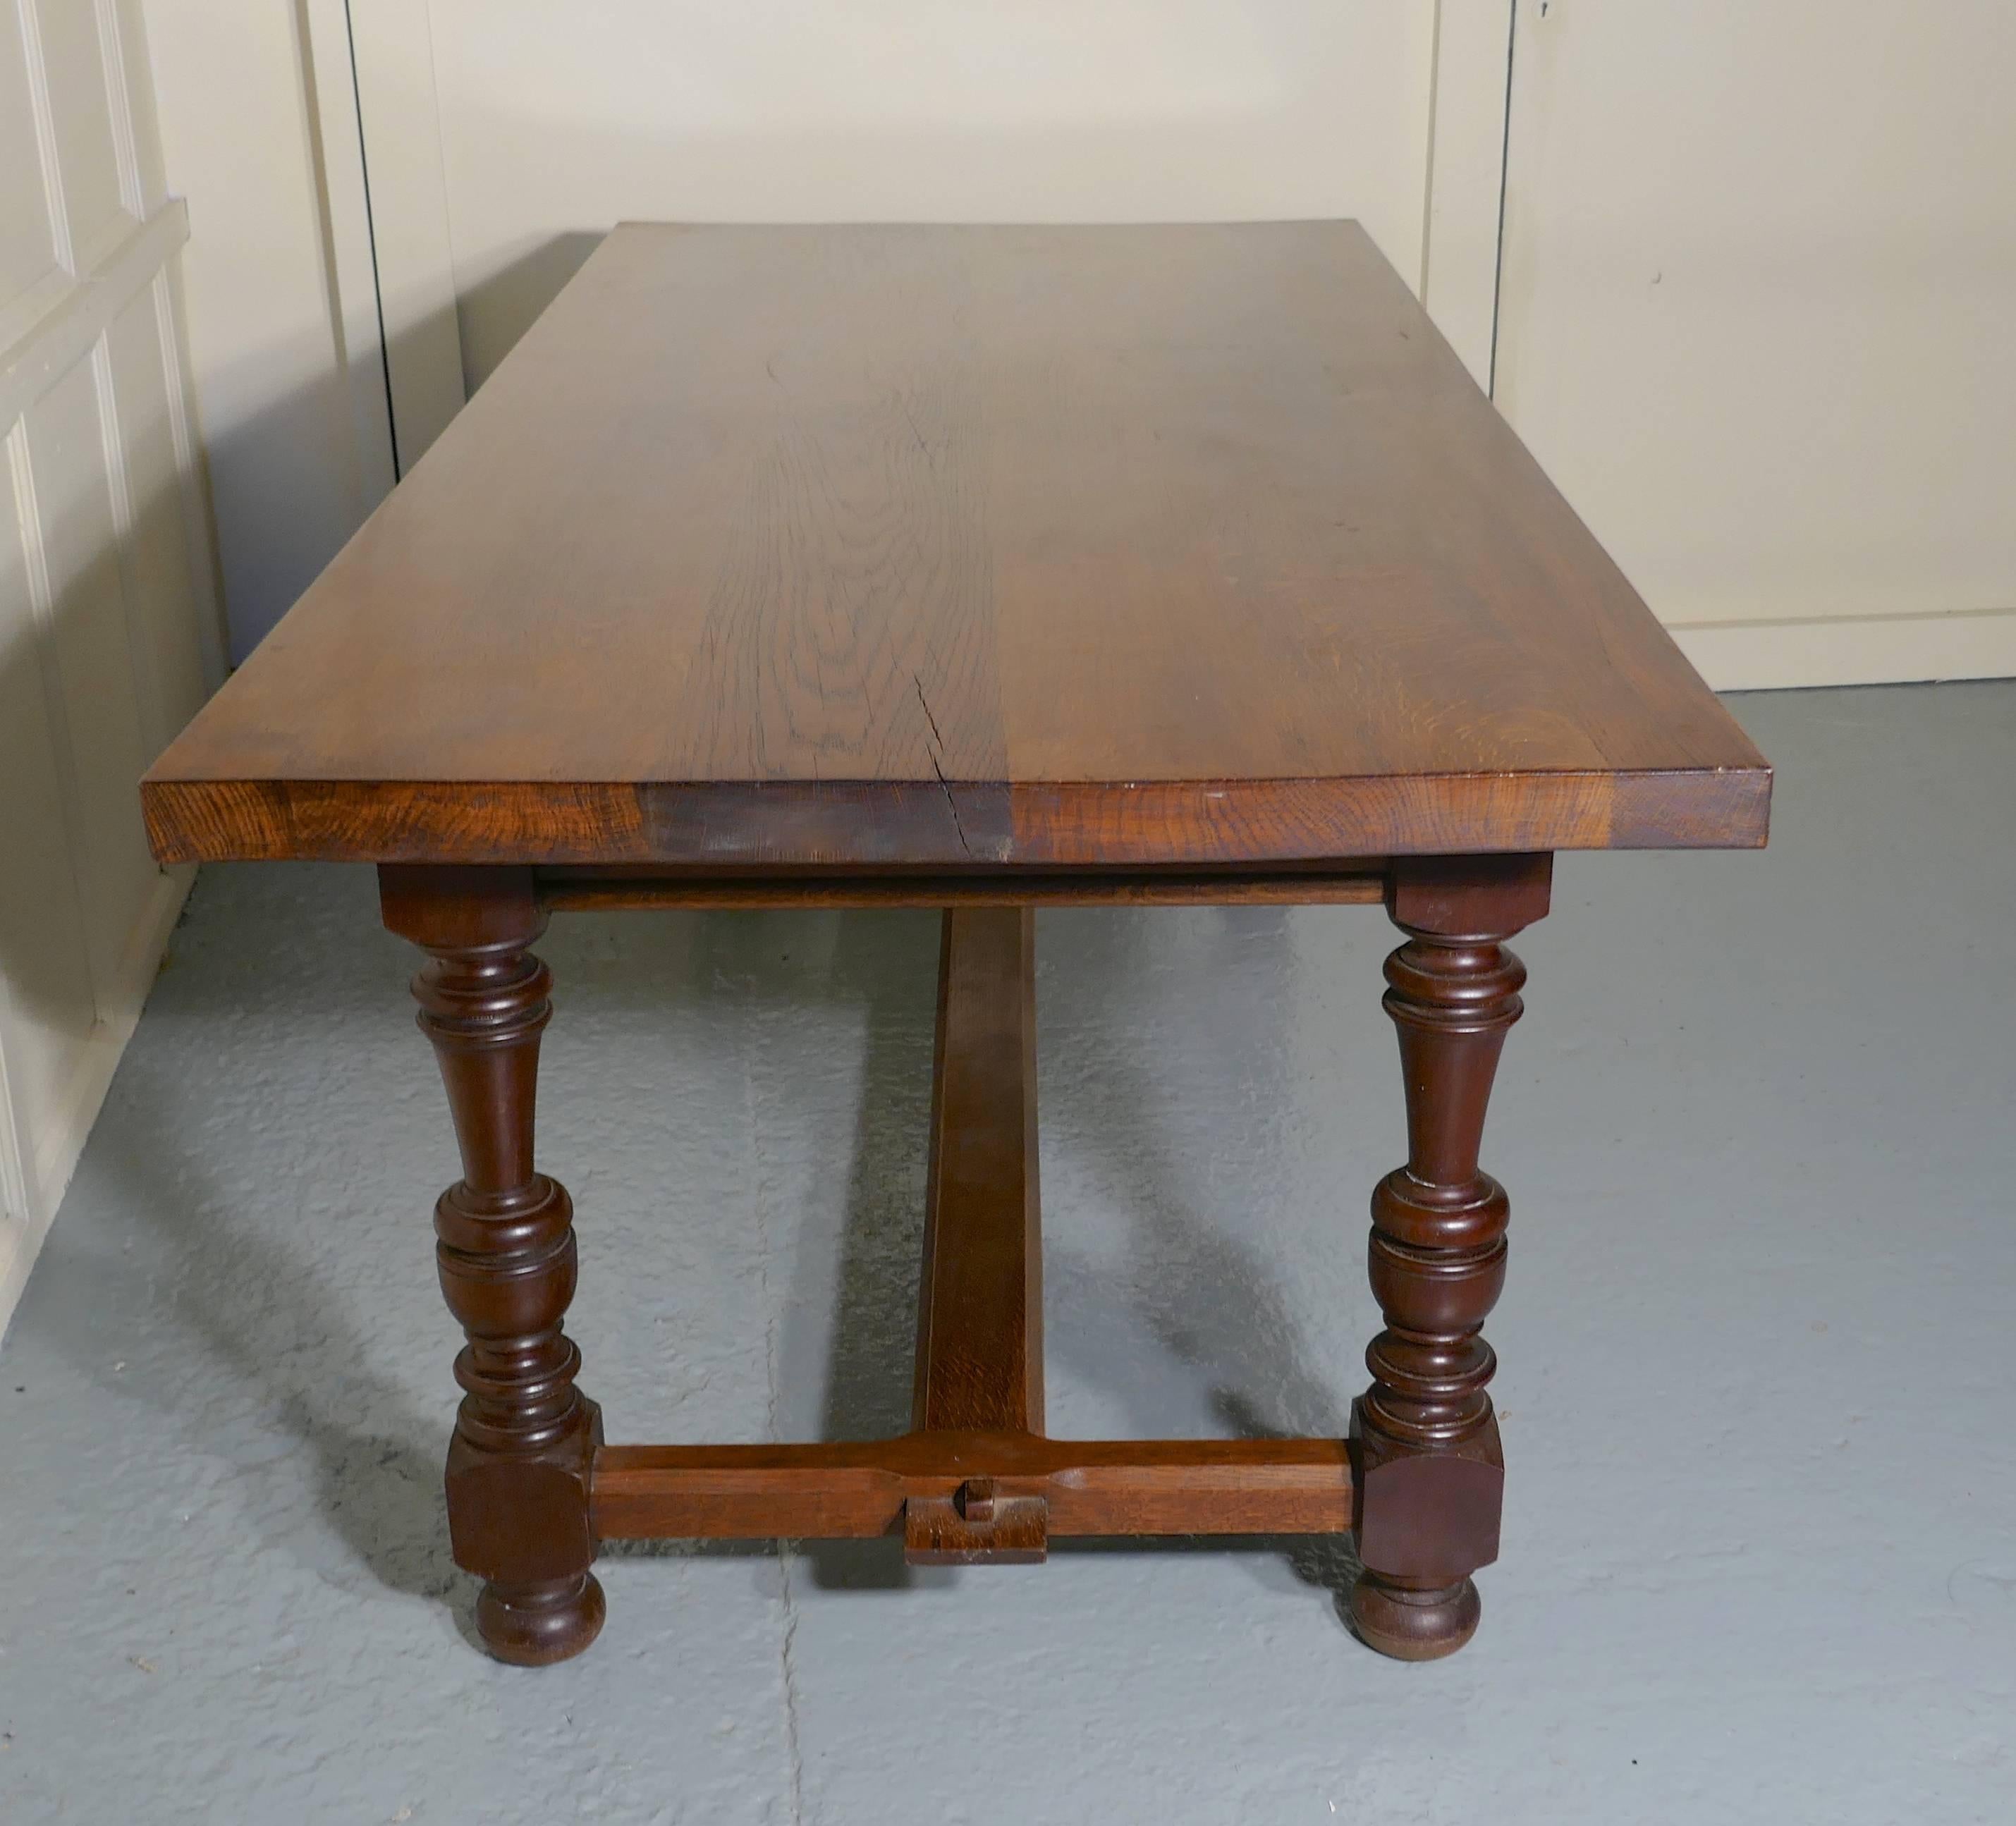 Large French Country oak dining table

This is a charming French Country oak dining table
This is a typical piece of French Provincial furniture it has stout turned legs and an oak plank top. 
The table it has very sturdy and chunky turned legs